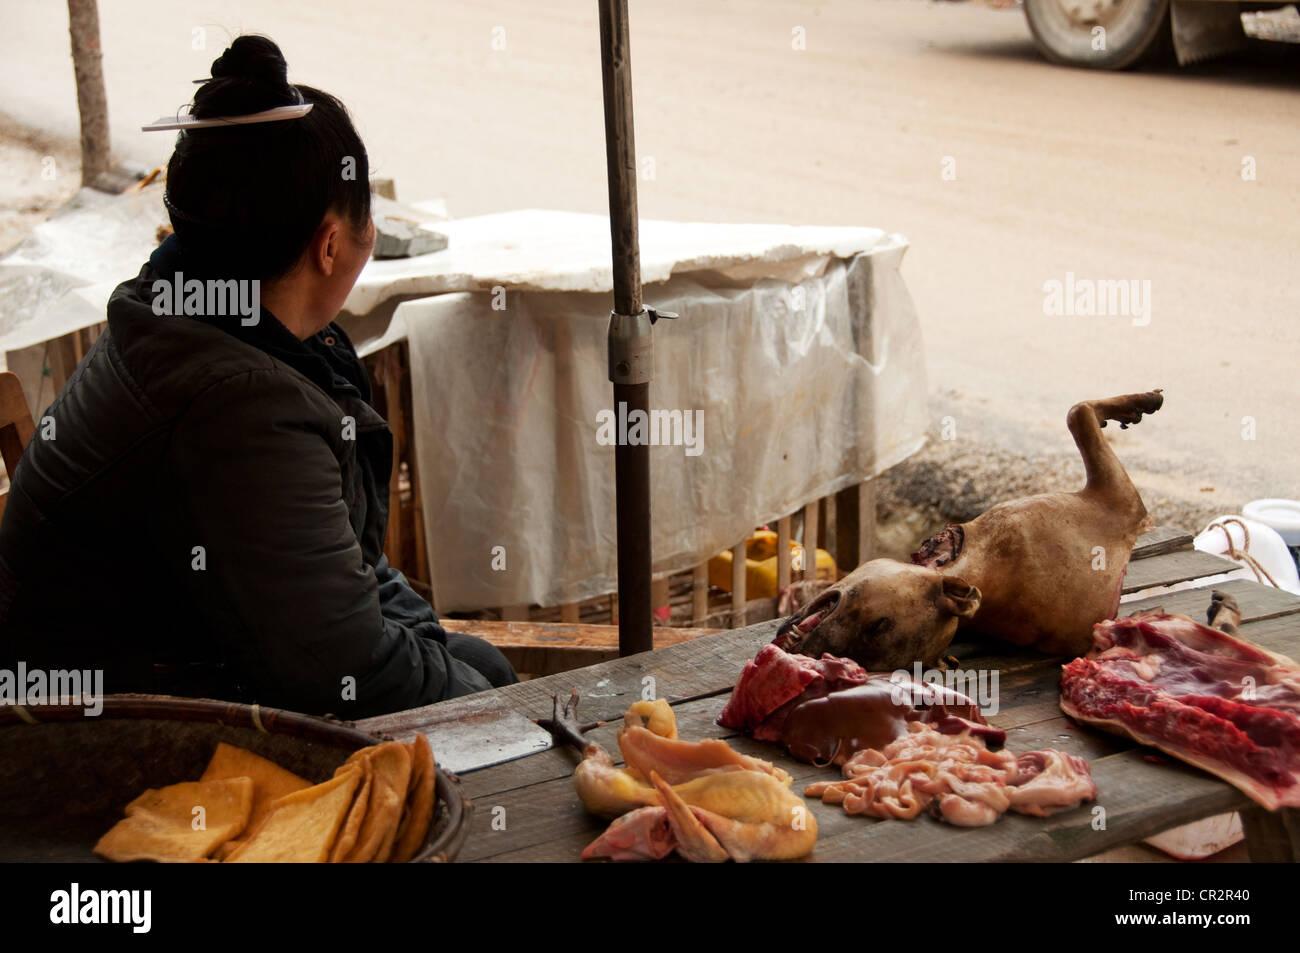 A woman selling dog meat at her market stall, Zhaoxing Dong Village, Southern China Stock Photo